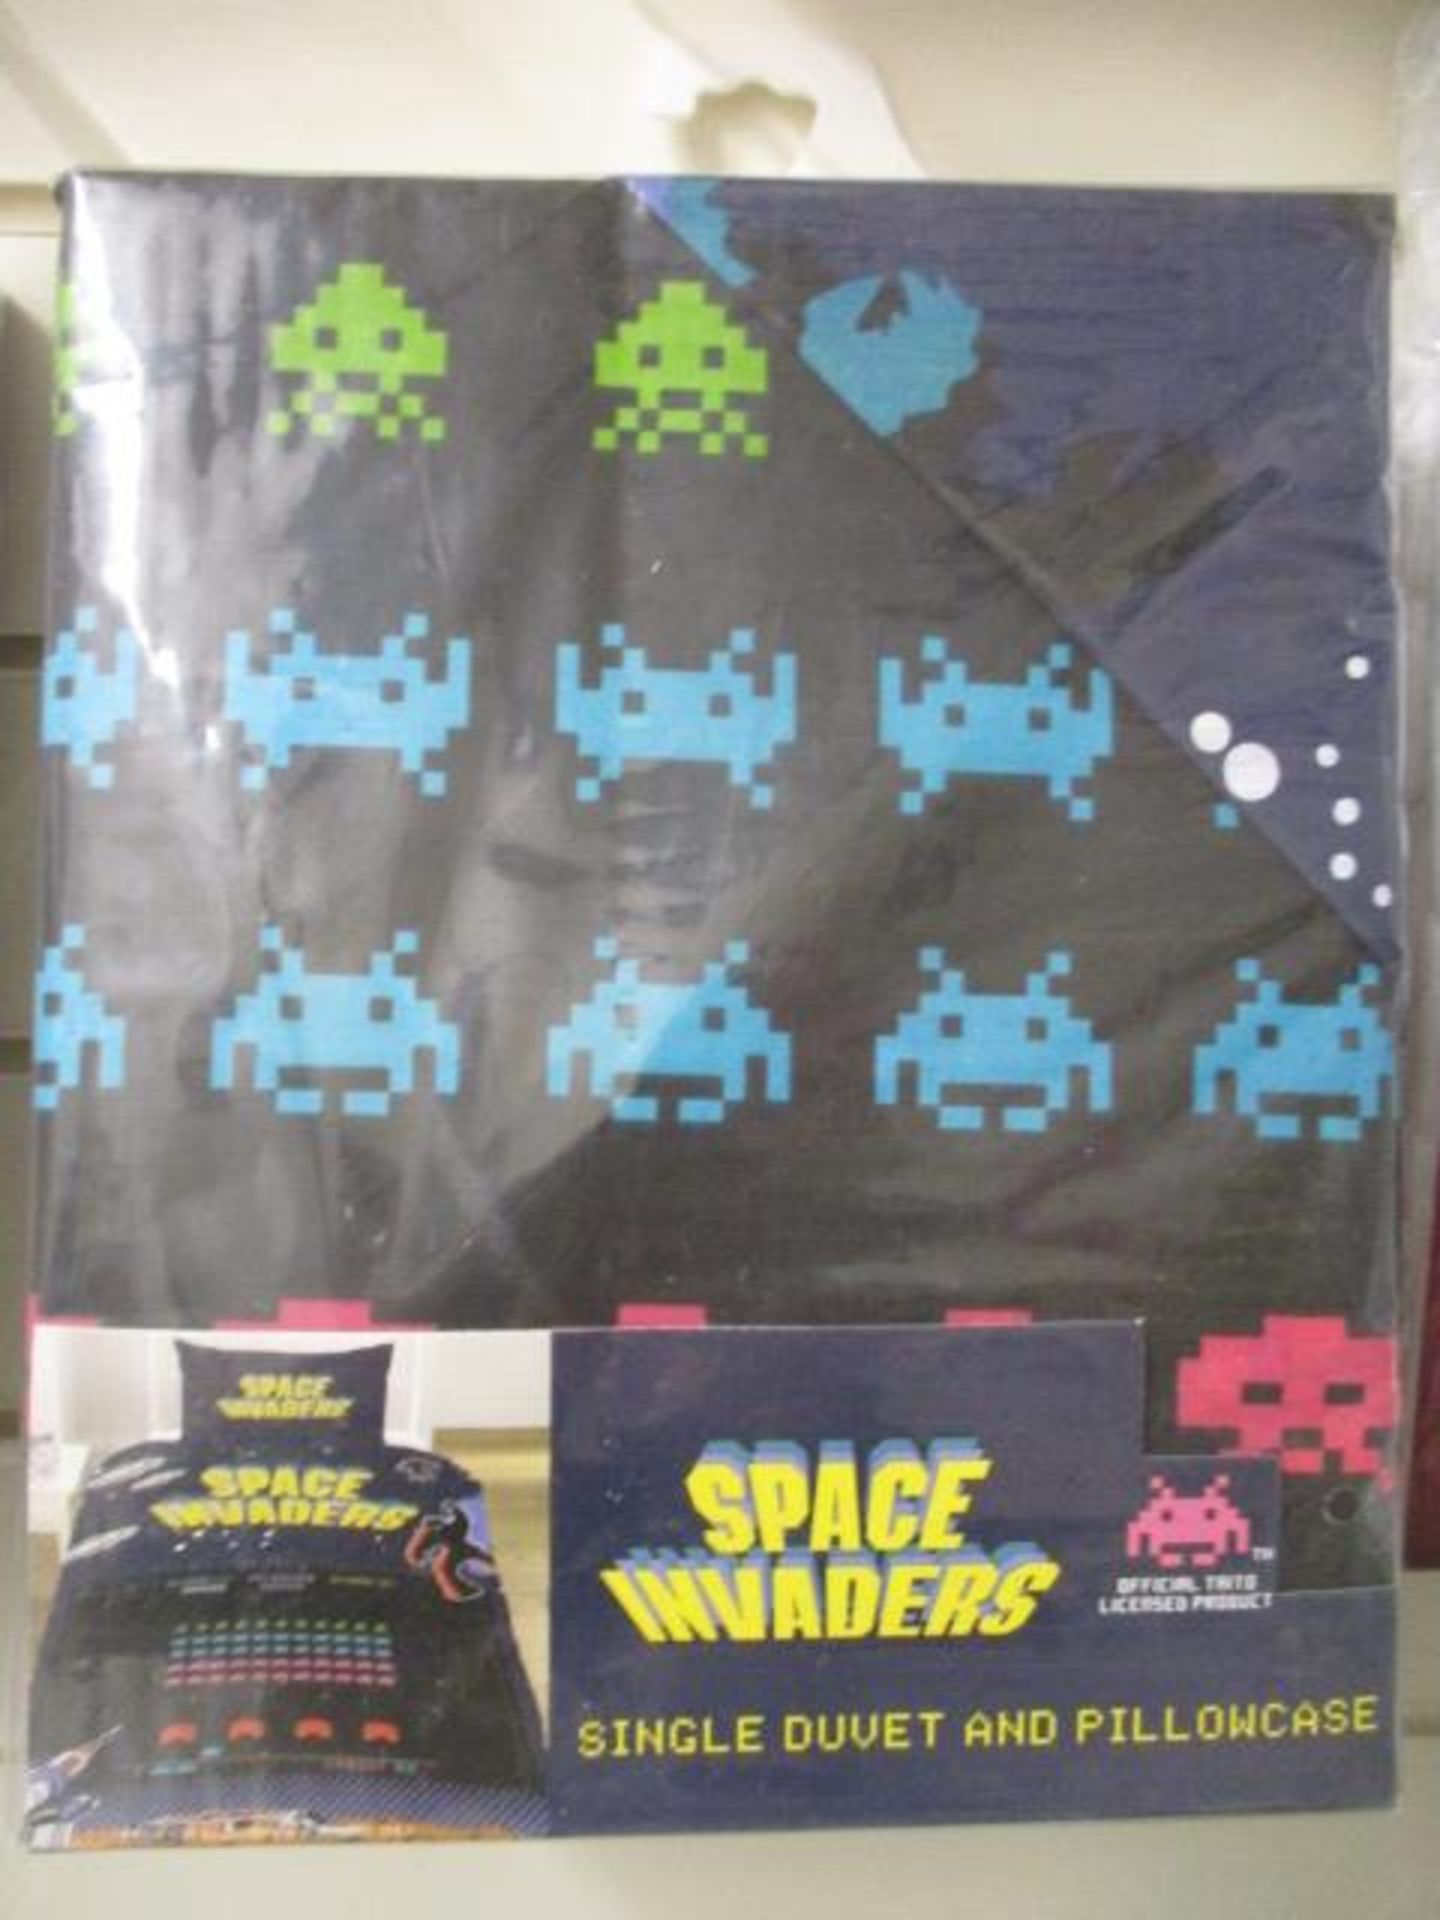 50pcs mix of Single and double Space Invaders duvet